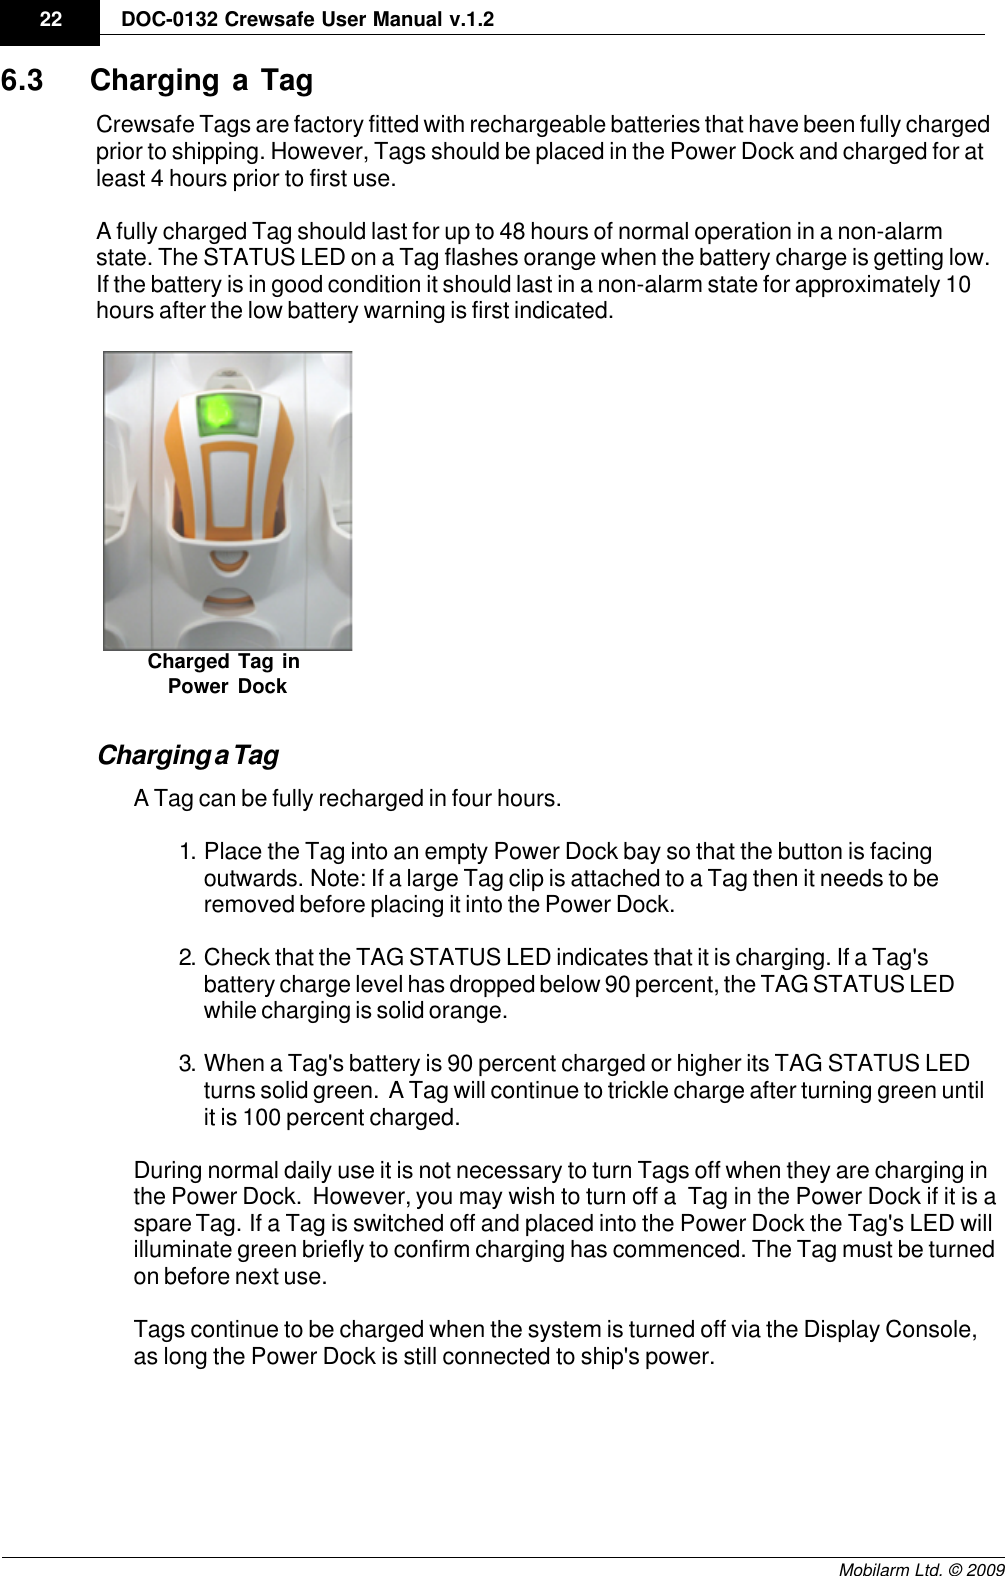 Draft22 DOC-0132 Crewsafe User Manual v.1.2Mobilarm Ltd. © 20096.3 Charging a TagCrewsafe Tags are factory fitted with rechargeable batteries that have been fully chargedprior to shipping. However, Tags should be placed in the Power Dock and charged for atleast 4 hours prior to first use. A fully charged Tag should last for up to 48 hours of normal operation in a non-alarmstate. The STATUS LED on a Tag flashes orange when the battery charge is getting low.If the battery is in good condition it should last in a non-alarm state for approximately 10hours after the low battery warning is first indicated.Charged Tag in Power DockCharging a TagA Tag can be fully recharged in four hours. 1. Place the Tag into an empty Power Dock bay so that the button is facingoutwards. Note: If a large Tag clip is attached to a Tag then it needs to beremoved before placing it into the Power Dock.2. Check that the TAG STATUS LED indicates that it is charging. If a Tag&apos;sbattery charge level has dropped below 90 percent, the TAG STATUS LEDwhile charging is solid orange.3. When a Tag&apos;s battery is 90 percent charged or higher its TAG STATUS LEDturns solid green.  A Tag will continue to trickle charge after turning green untilit is 100 percent charged.During normal daily use it is not necessary to turn Tags off when they are charging inthe Power Dock.  However, you may wish to turn off a  Tag in the Power Dock if it is aspare Tag.  If a Tag is switched off and placed into the Power Dock the Tag&apos;s LED willilluminate green briefly to confirm charging has commenced. The Tag must be turnedon before next use.Tags continue to be charged when the system is turned off via the Display Console,as long the Power Dock is still connected to ship&apos;s power.